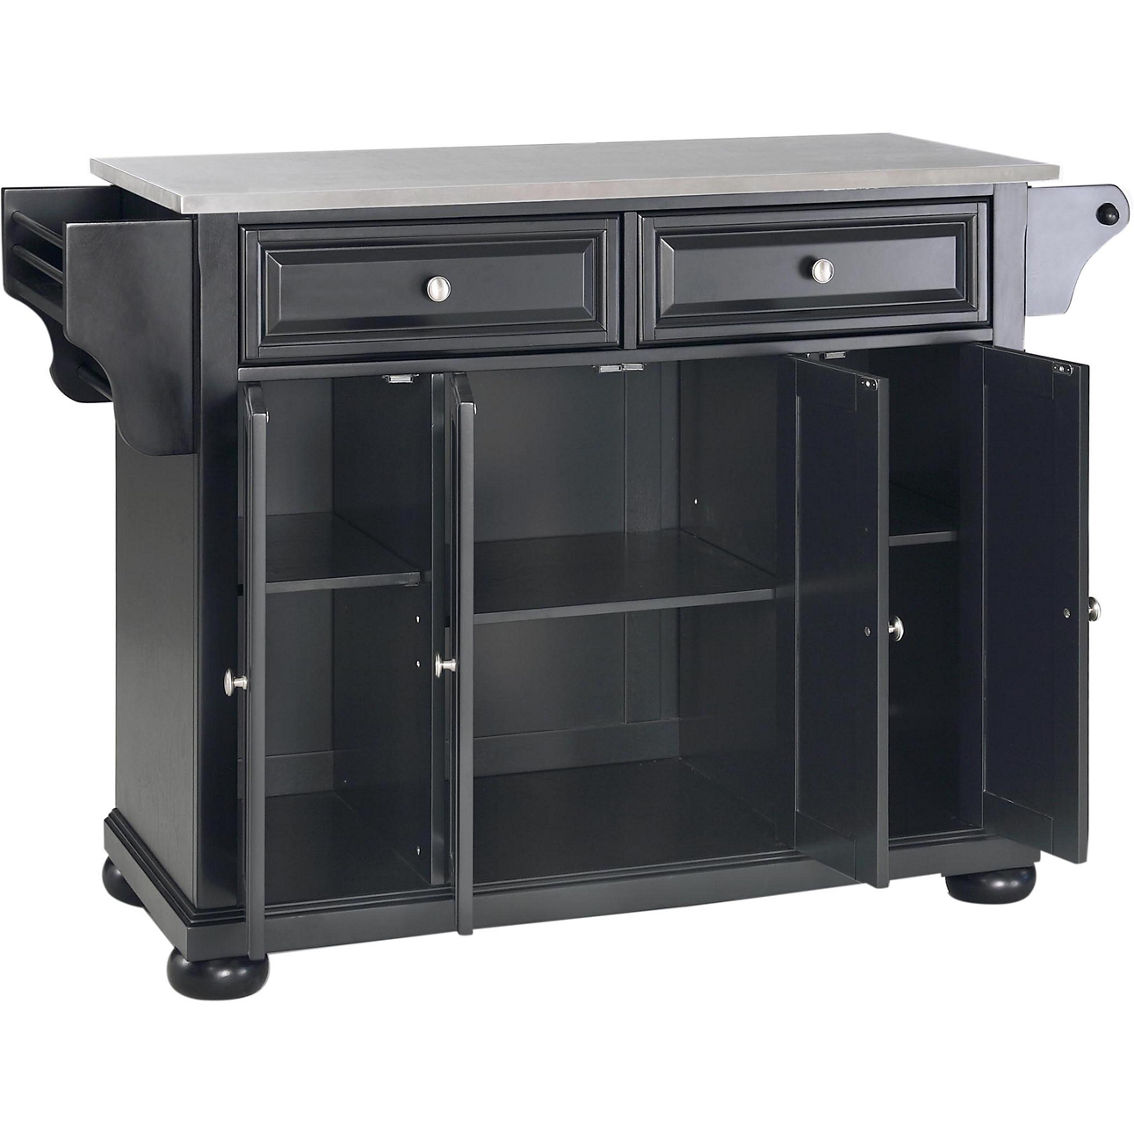 Crosley Furniture Alexandria Stainless Steel Top Full Size Kitchen Island/Cart - Image 2 of 4